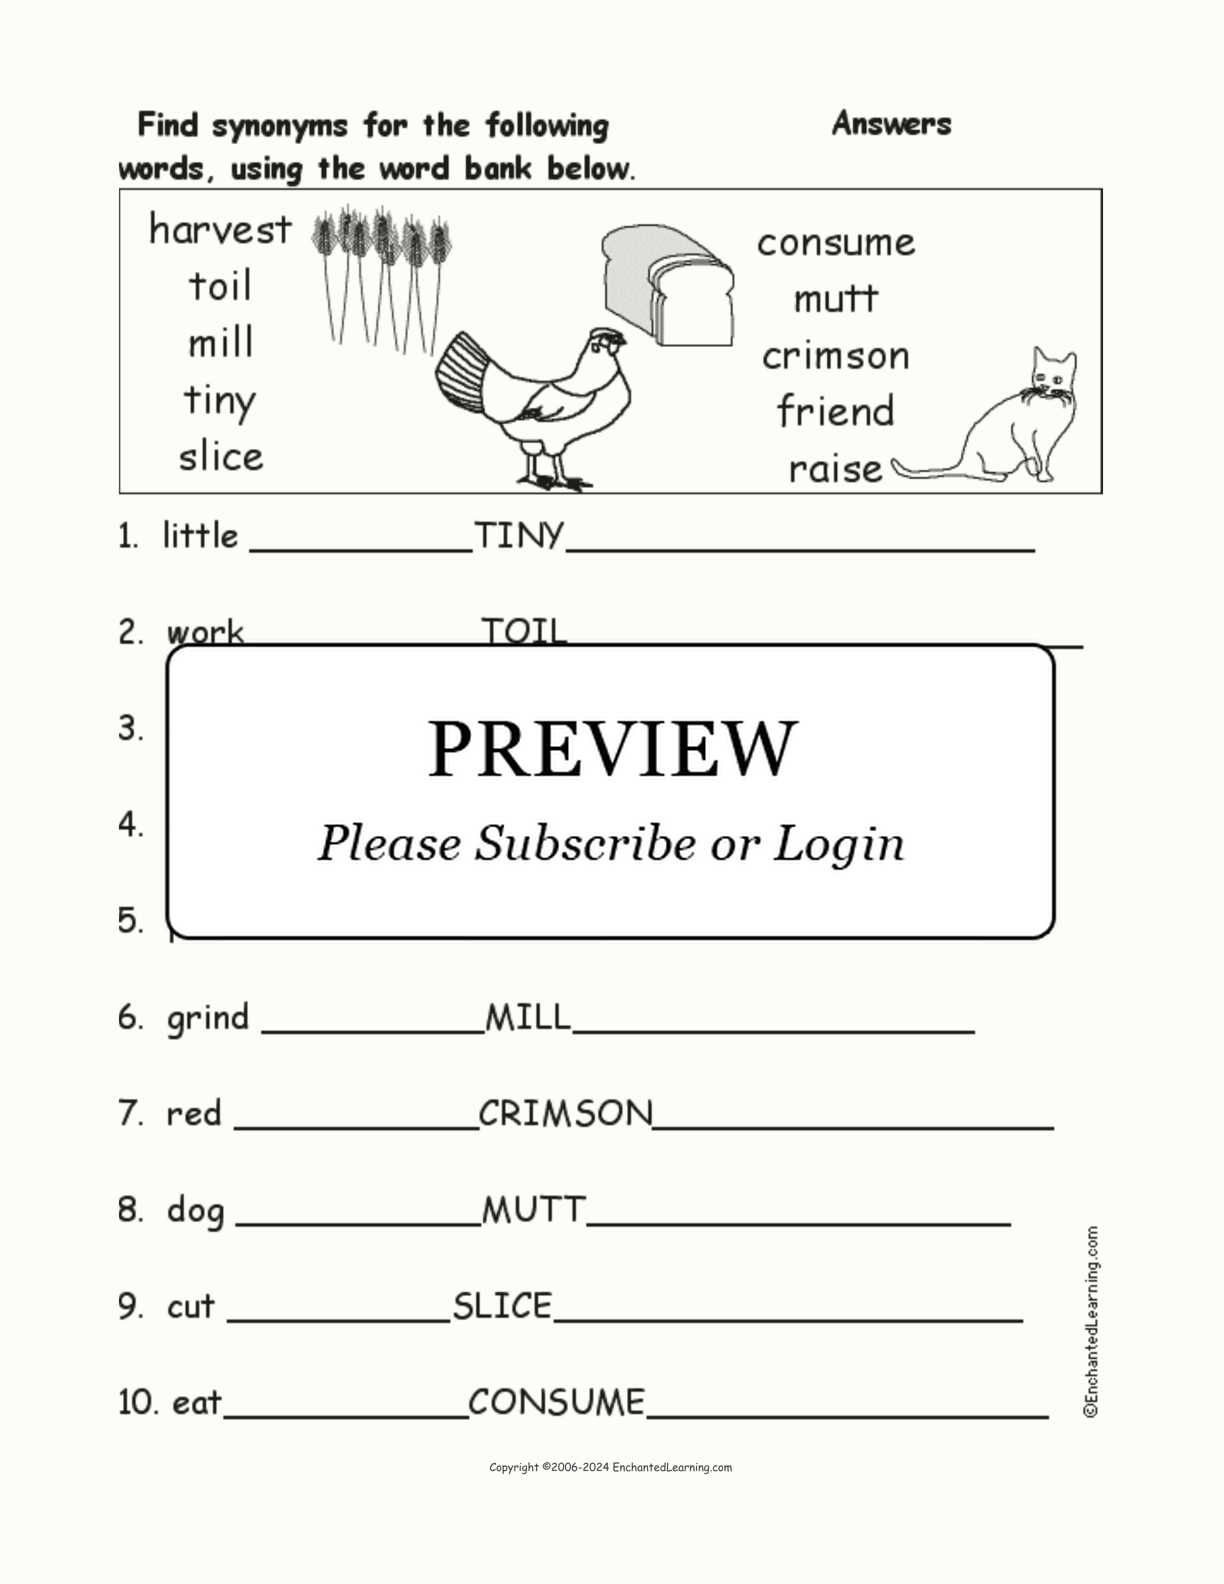 'The Little Red Hen' Synonyms interactive worksheet page 2